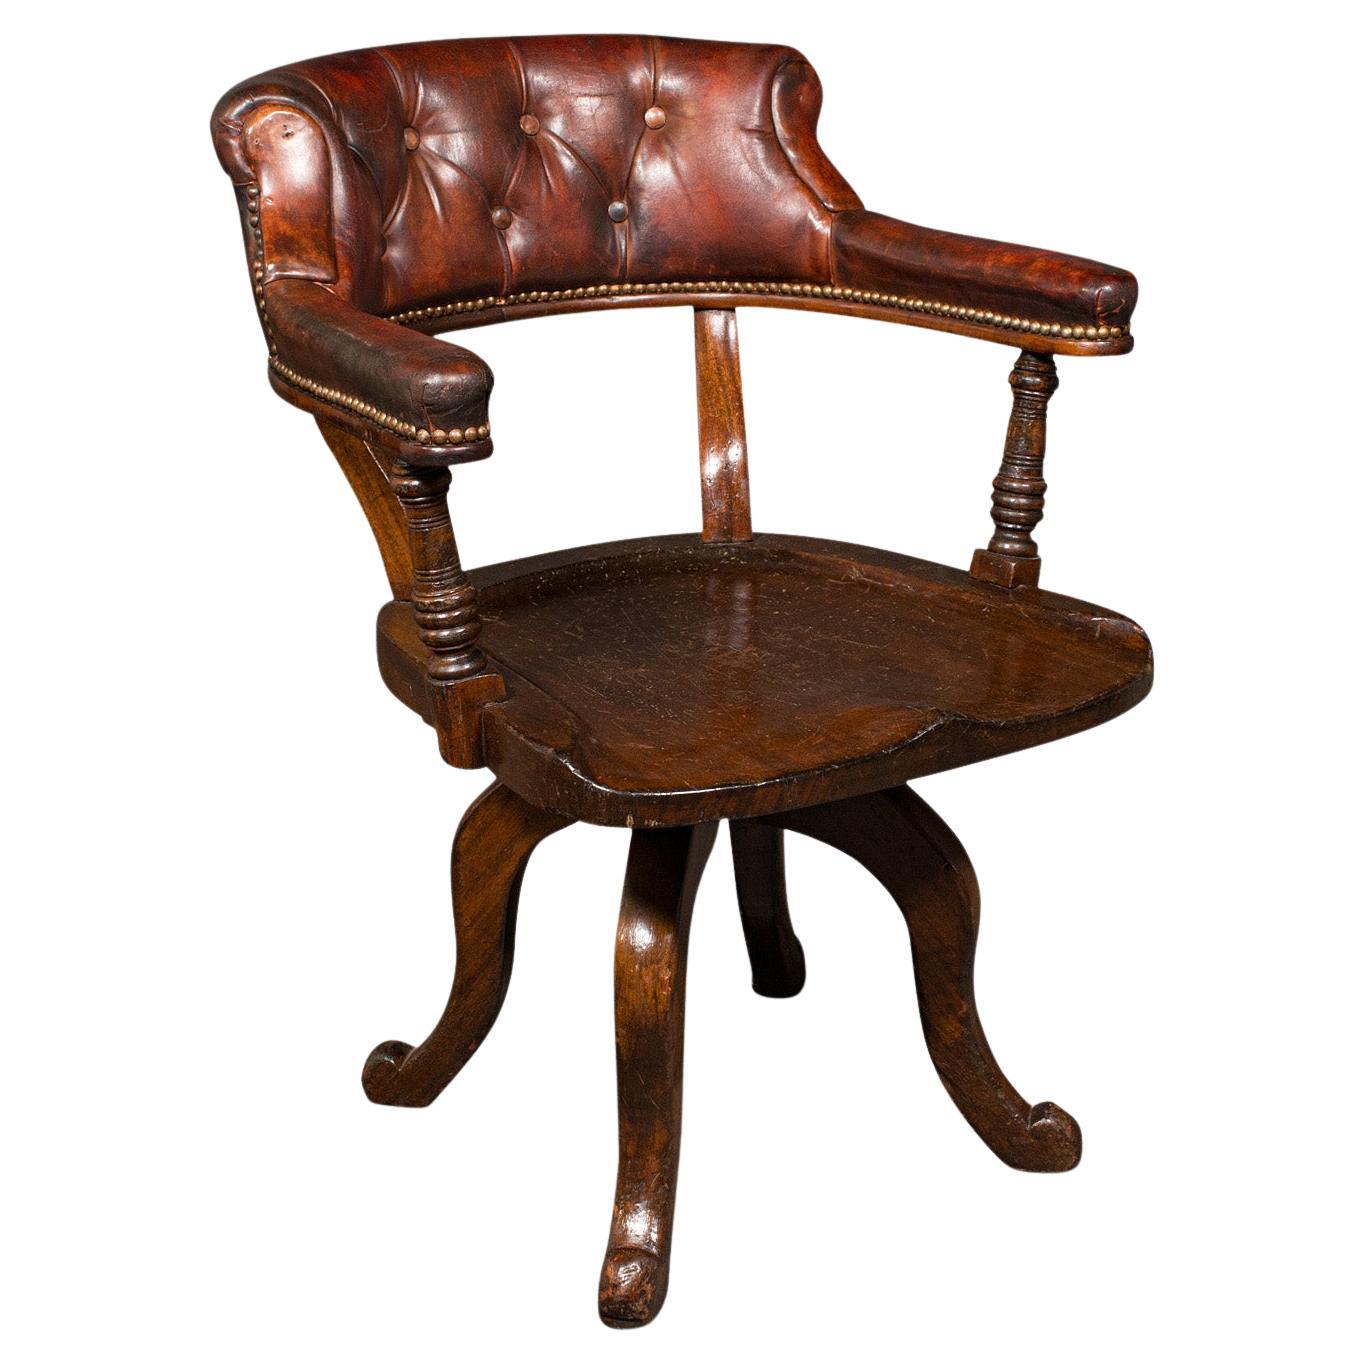 Antique Porter's Hall Chair, English, Leather, Rotary Desk Seat, Victorian, 1880 For Sale